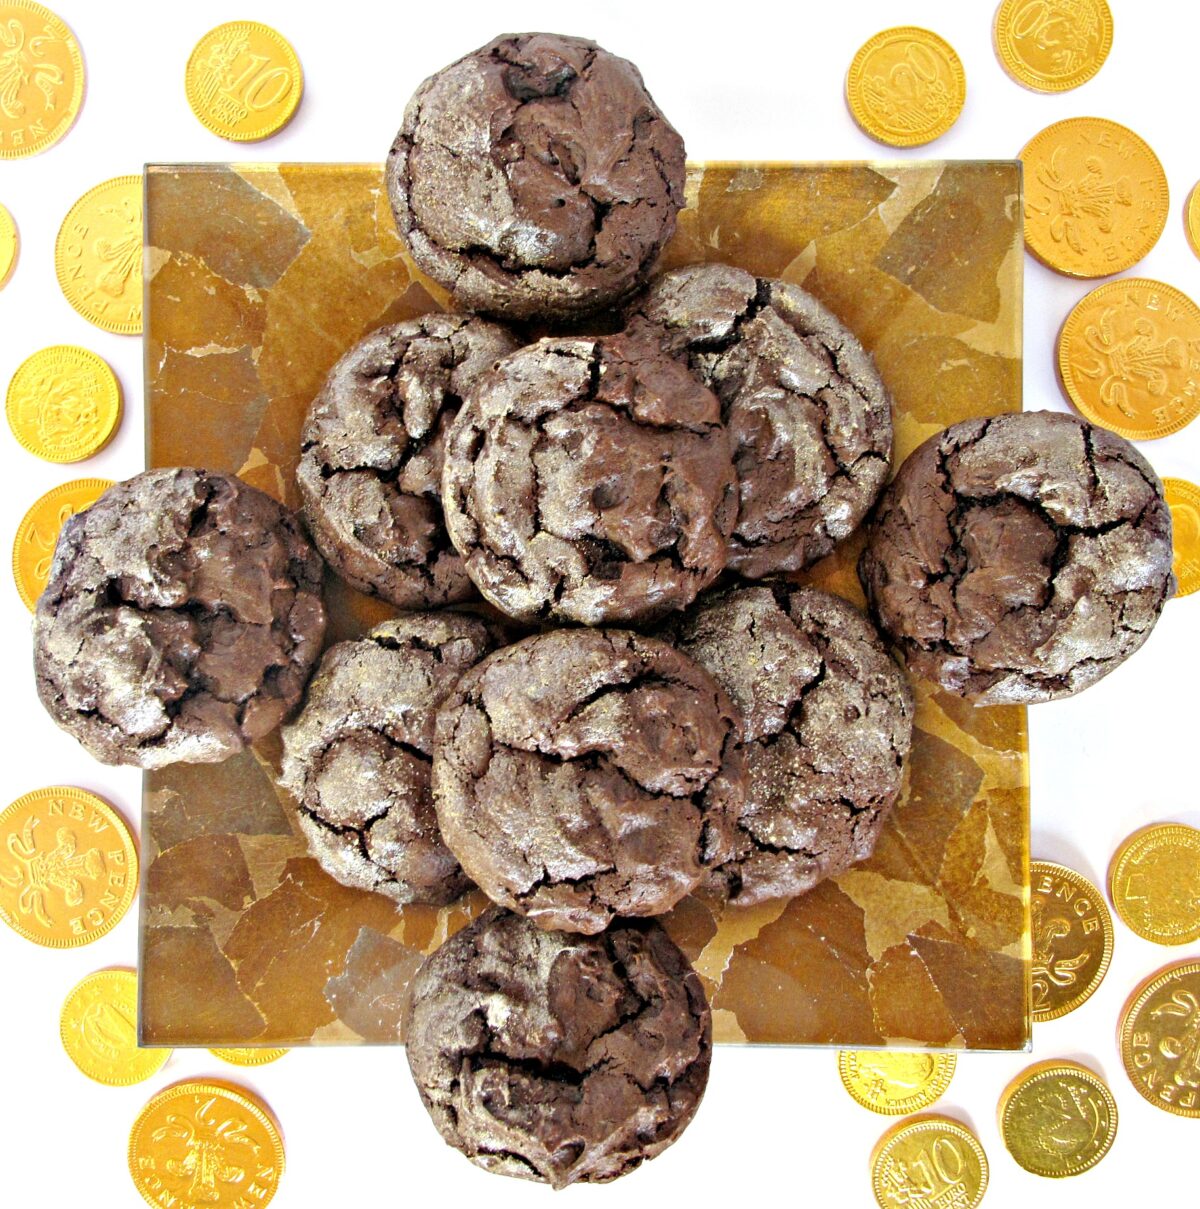 Chocolate cookies with gold dusted tops on a square gold plate with gold foil coins.